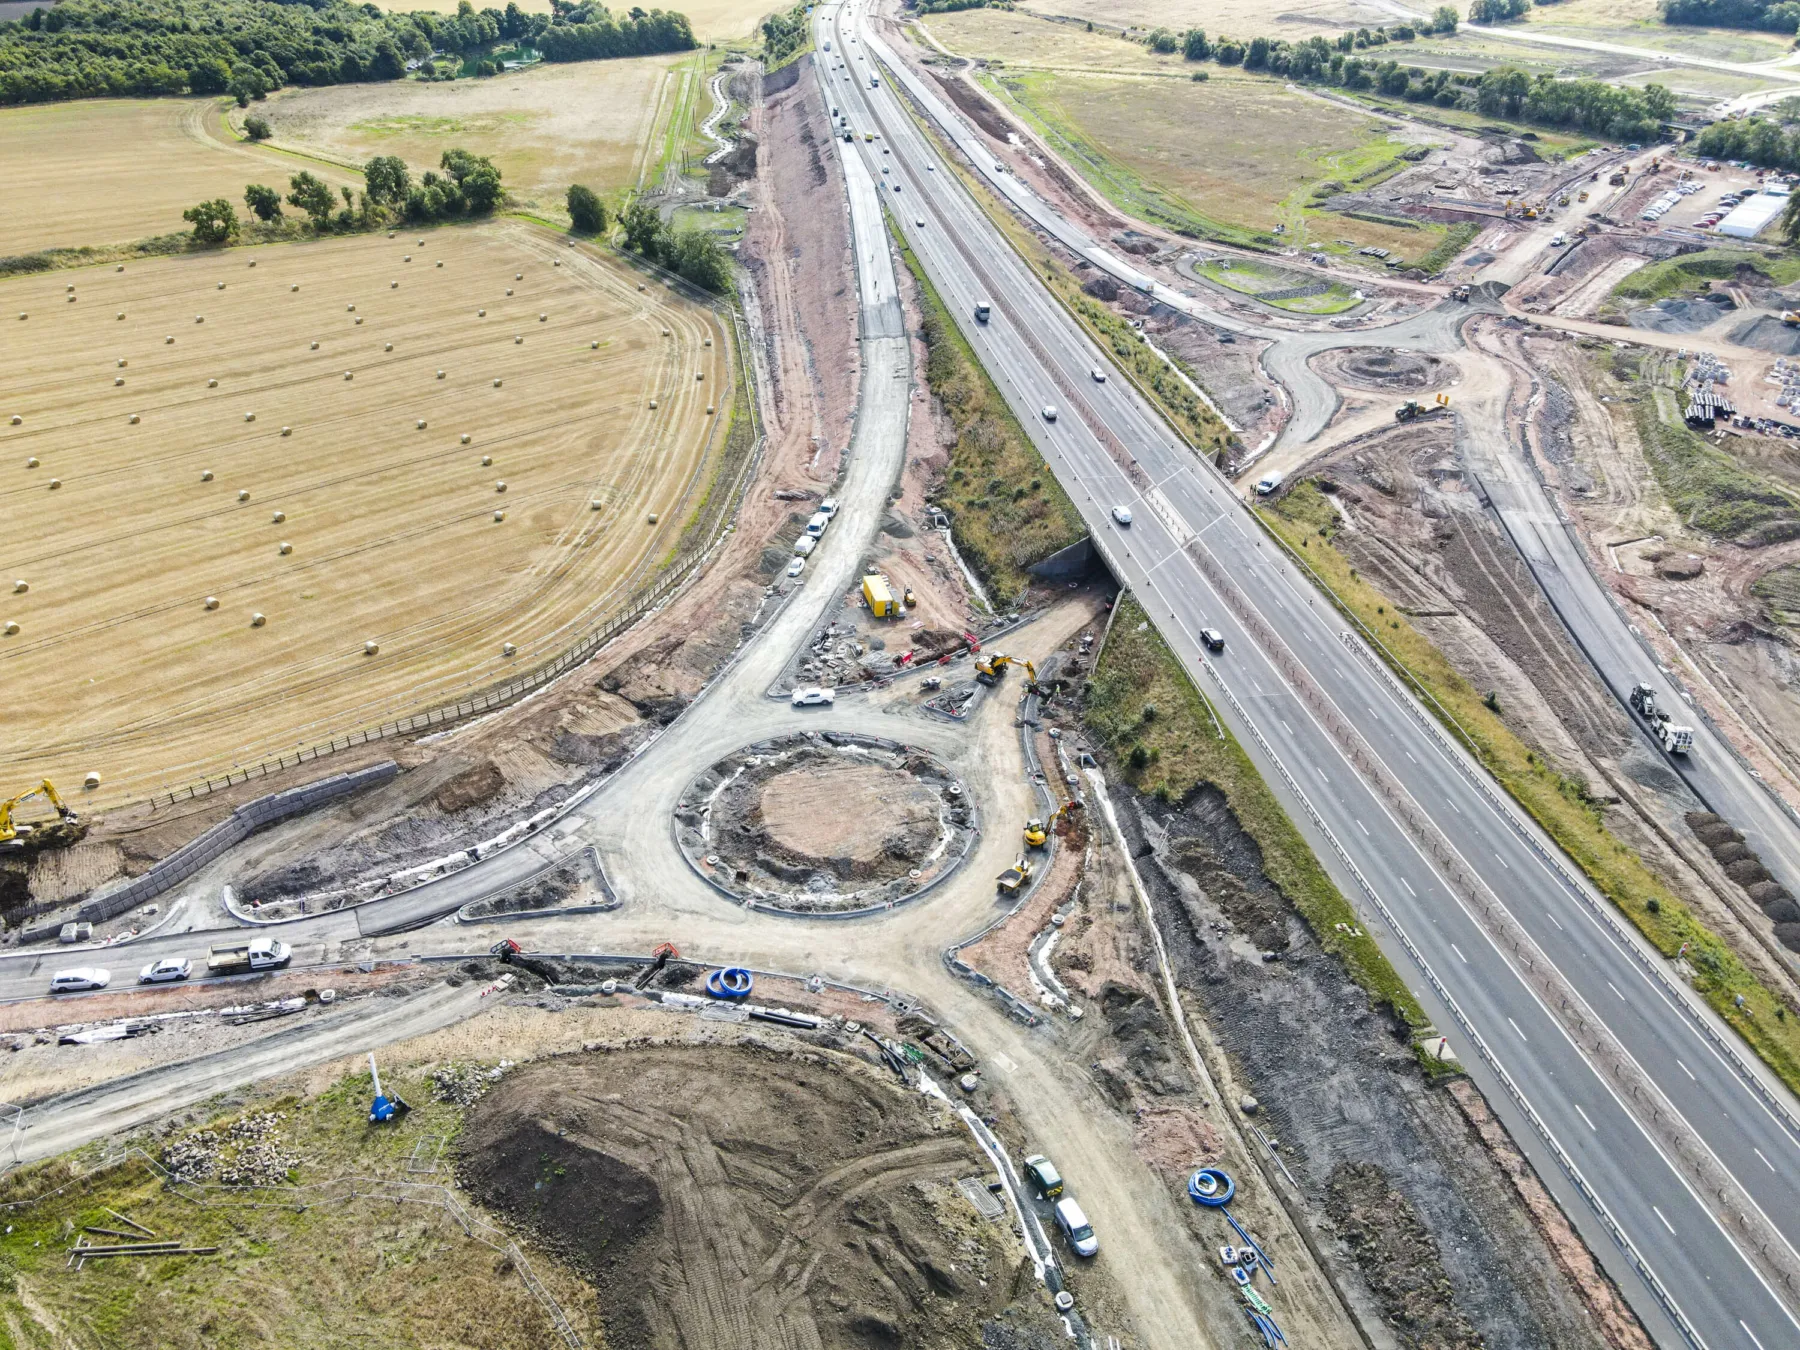 An aerial view of the M9 junction at Winchburgh under construction. The motorway flies over a road with two feeder roundabouts. The road works are surrounded by fields at harvest with hay bales.